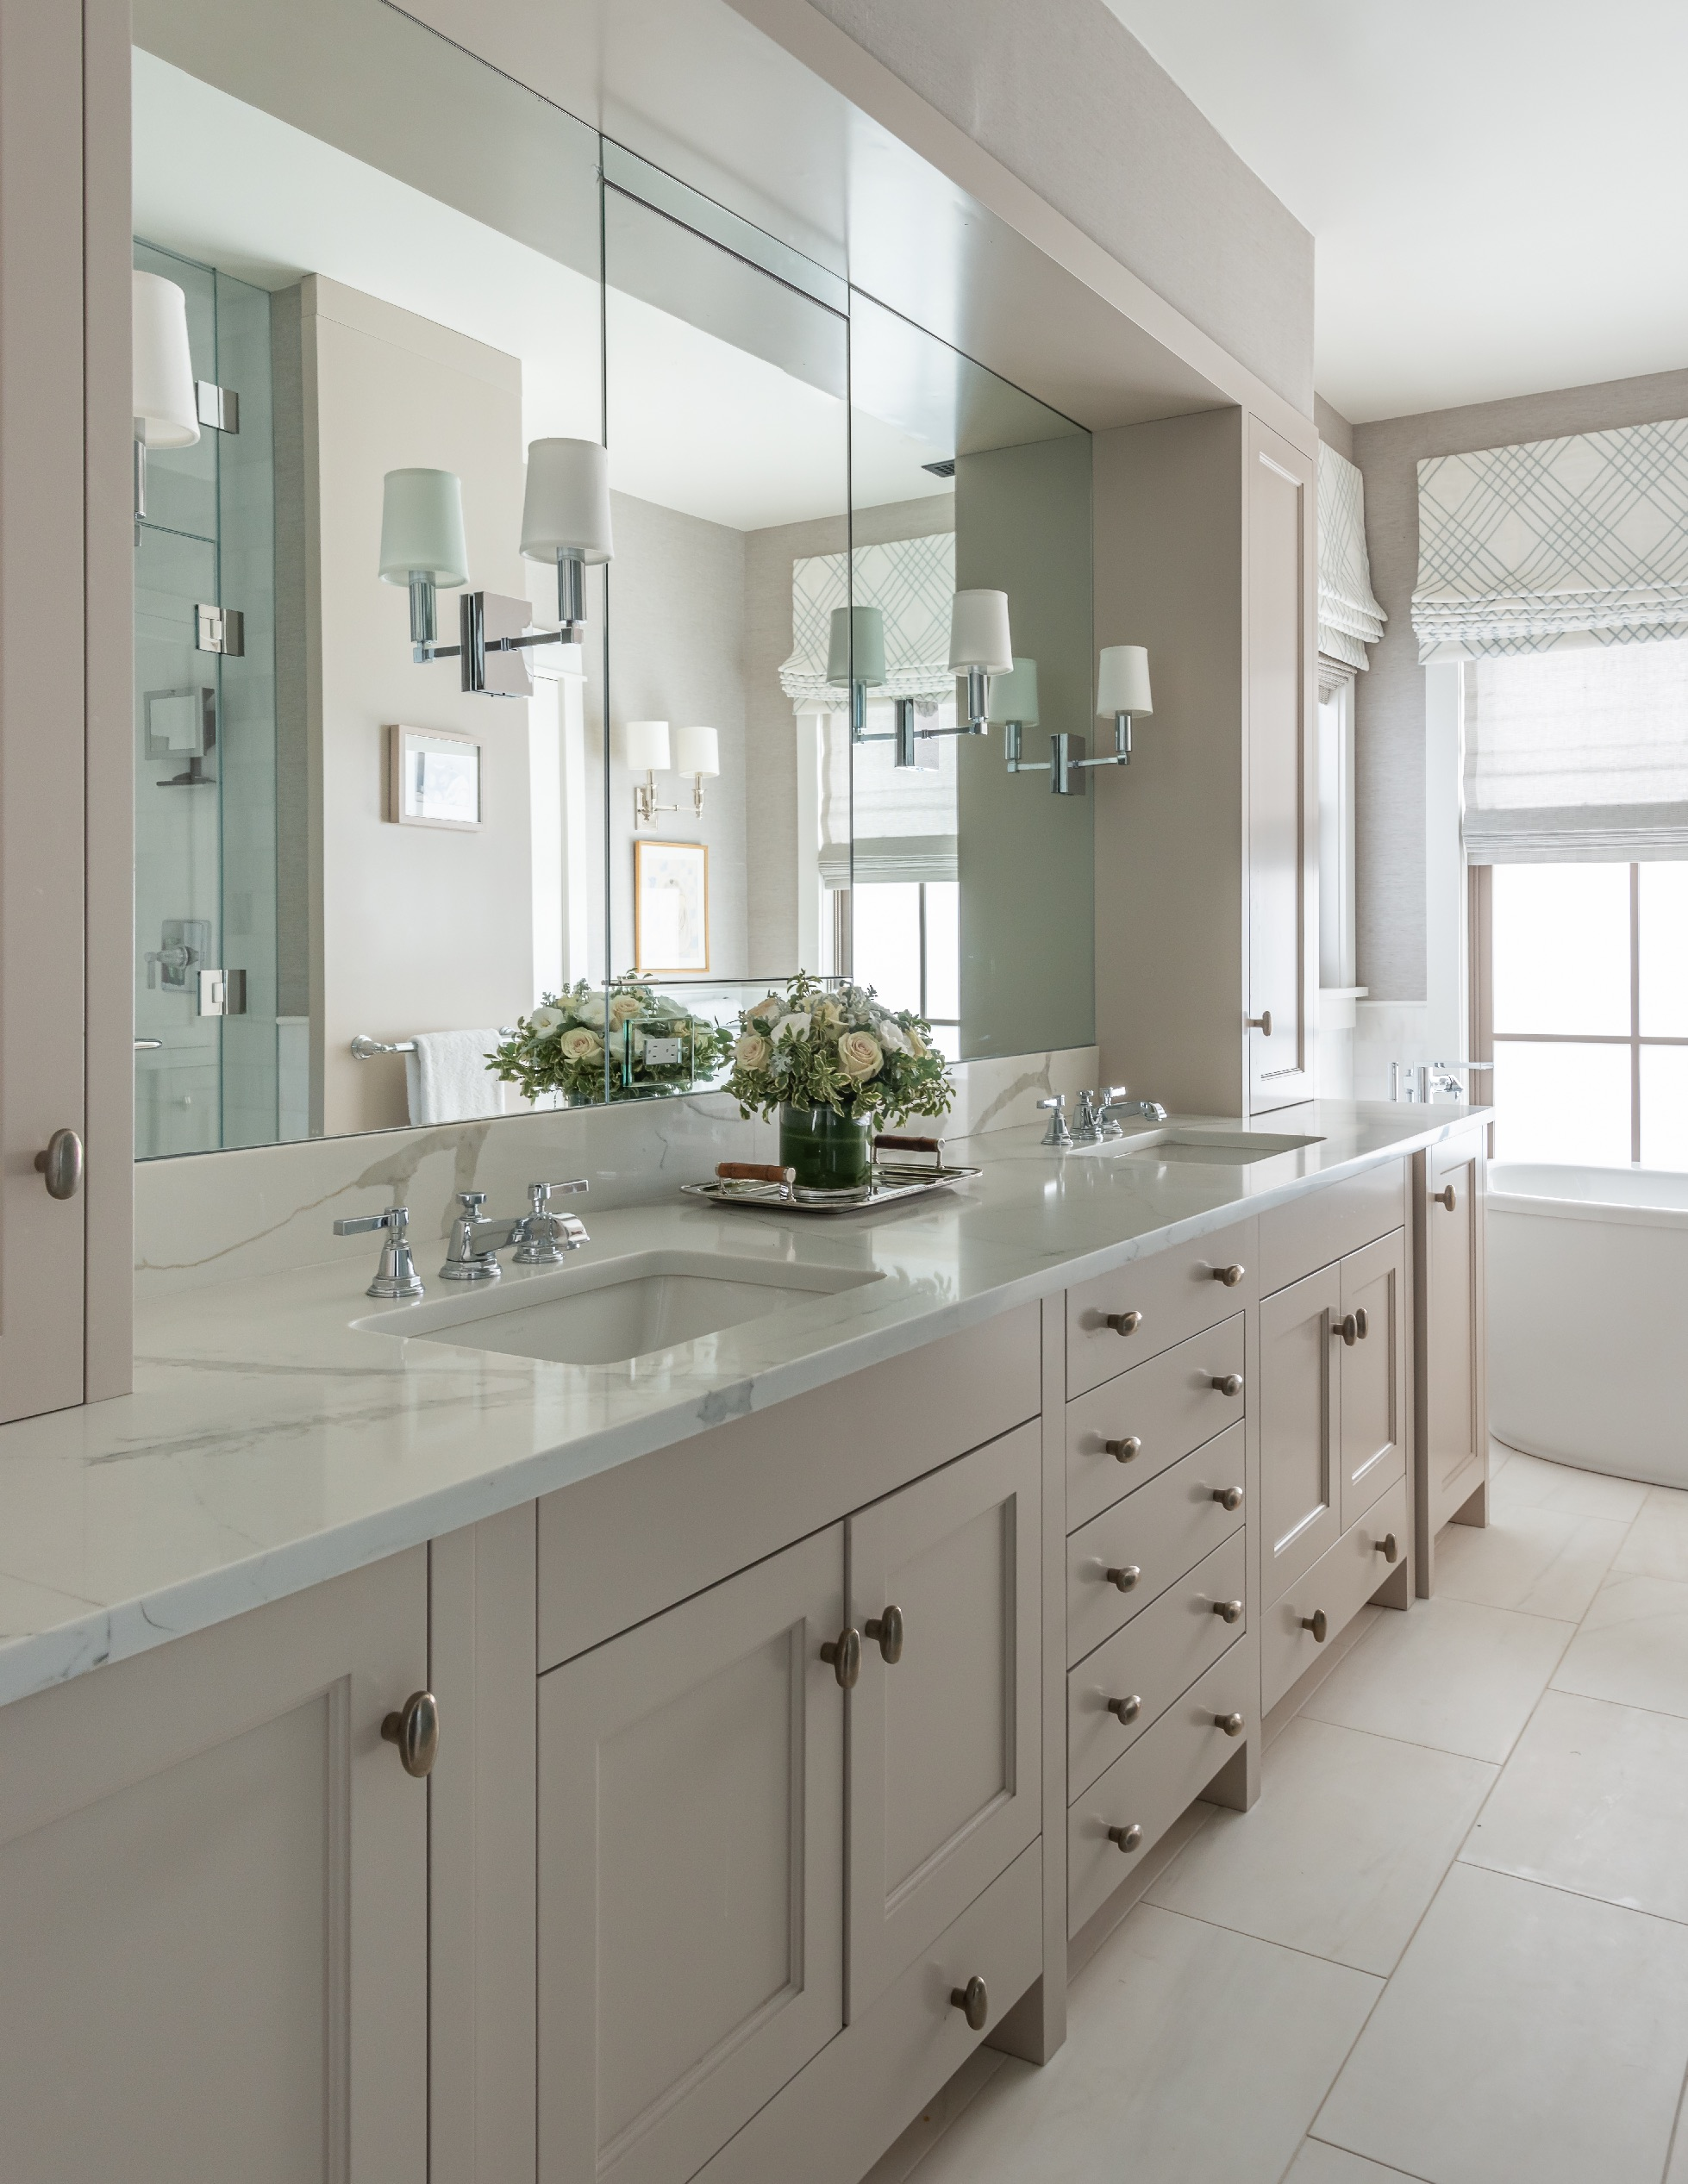  Transitional Vacation Home Bathroom. Snedens Landing Residence by Alan Tanksley, Inc..